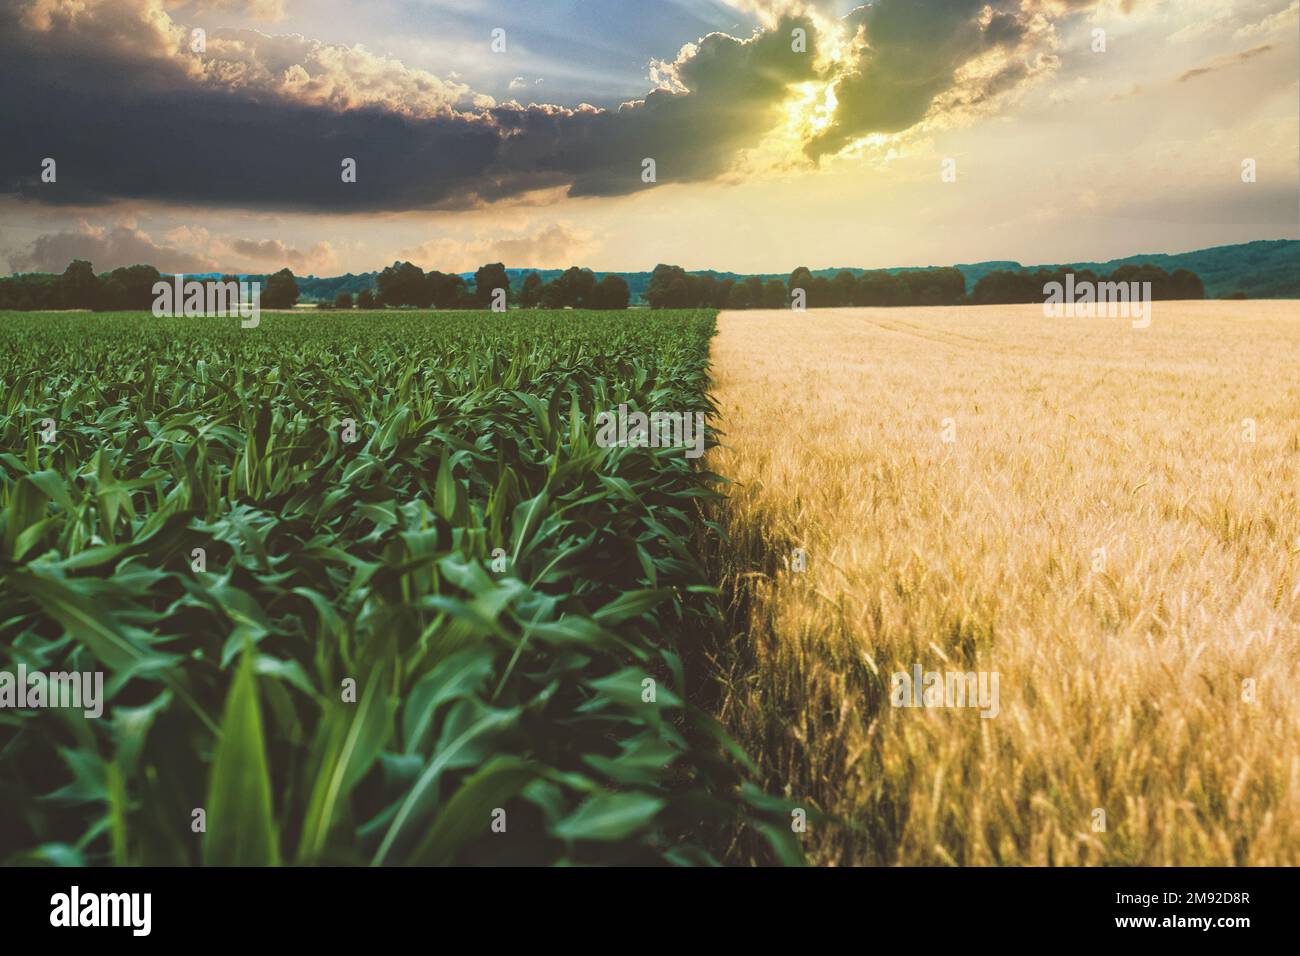 Corn and wheat fields side by side with a spectacular sky, Balassagyarmat, Hungary Stock Photo